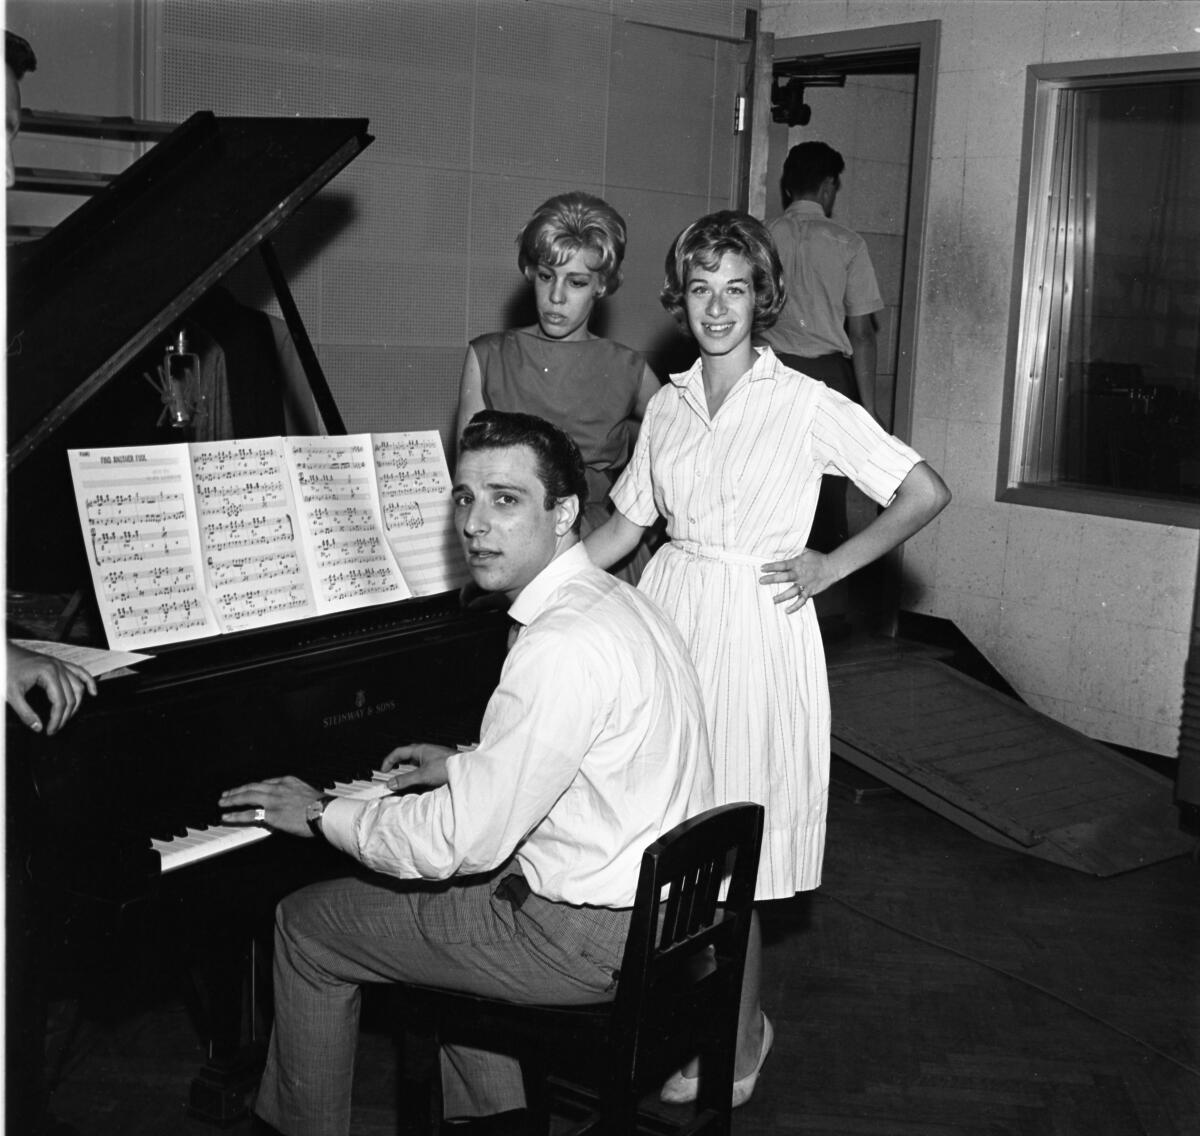 Two women stand next to a man seated at a piano